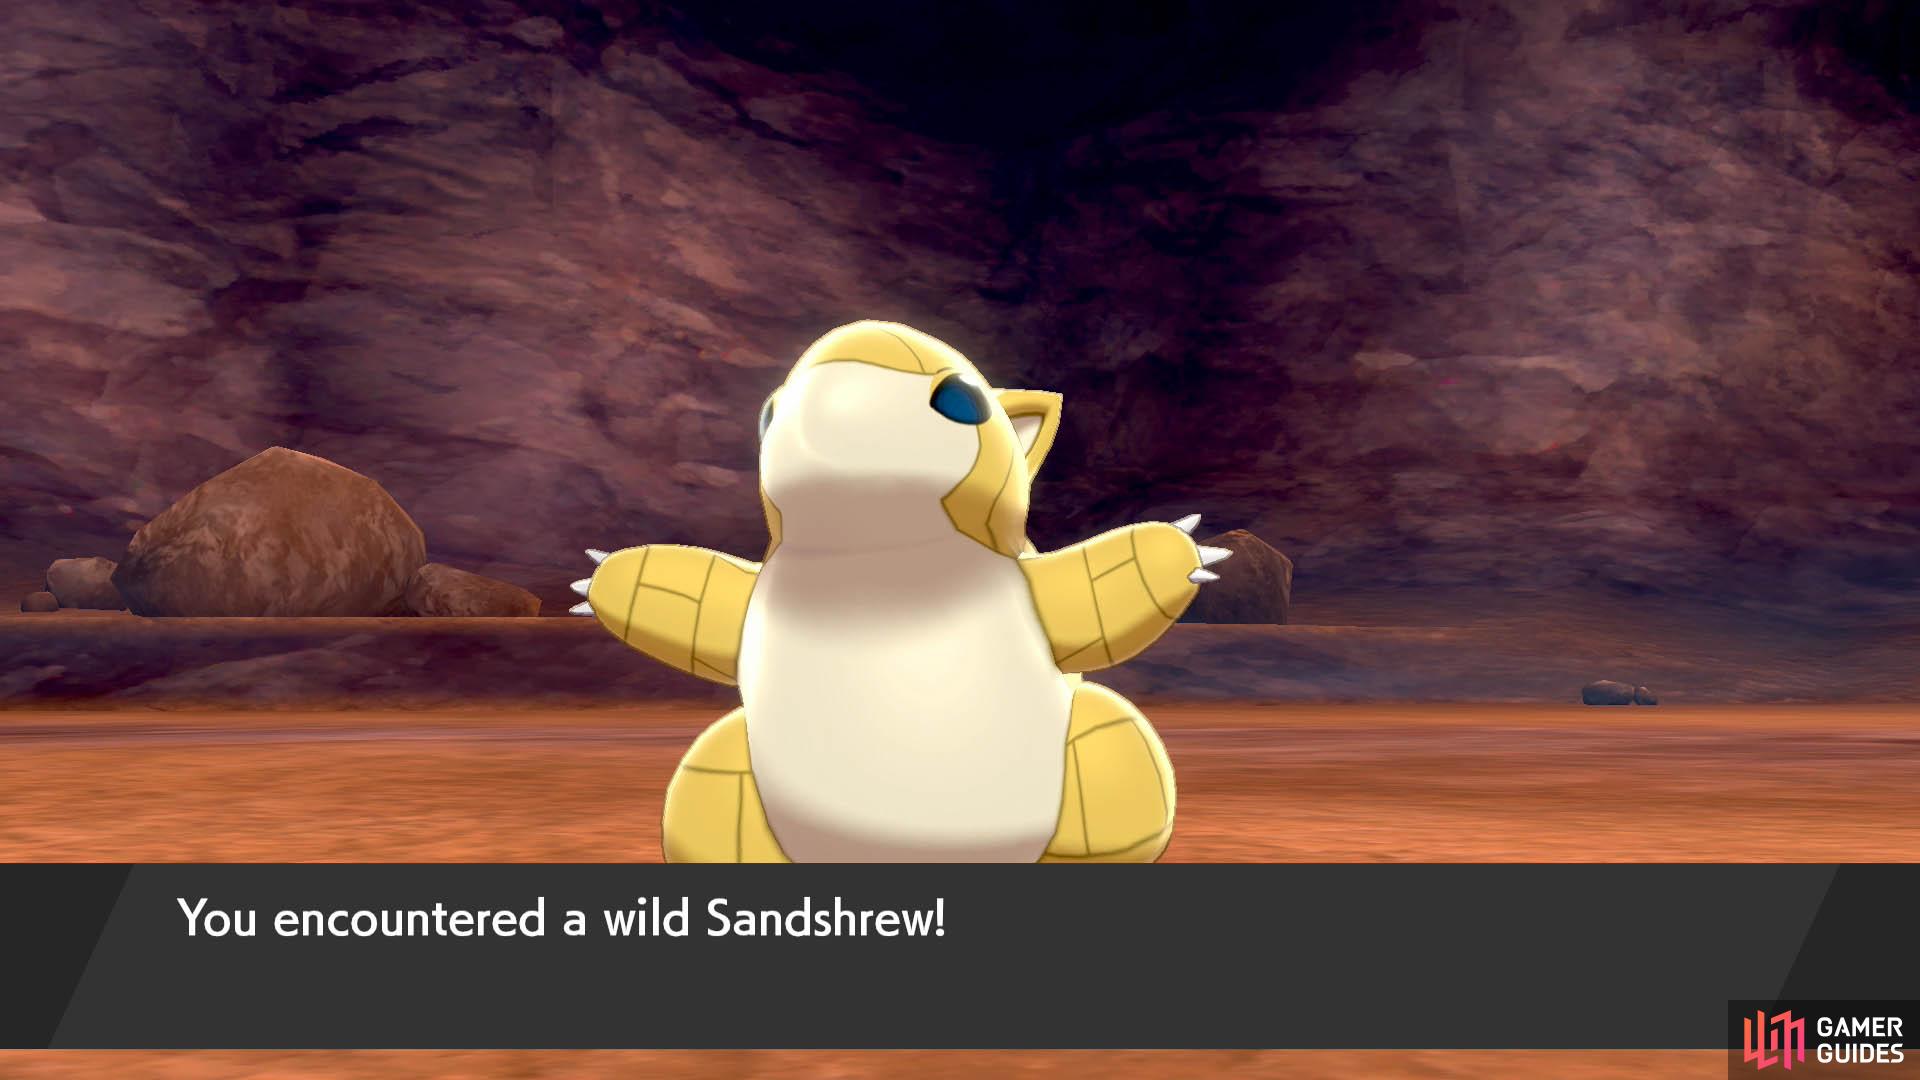 You can also trade a Sandshrew caught here for an Alolan one elsewhere.